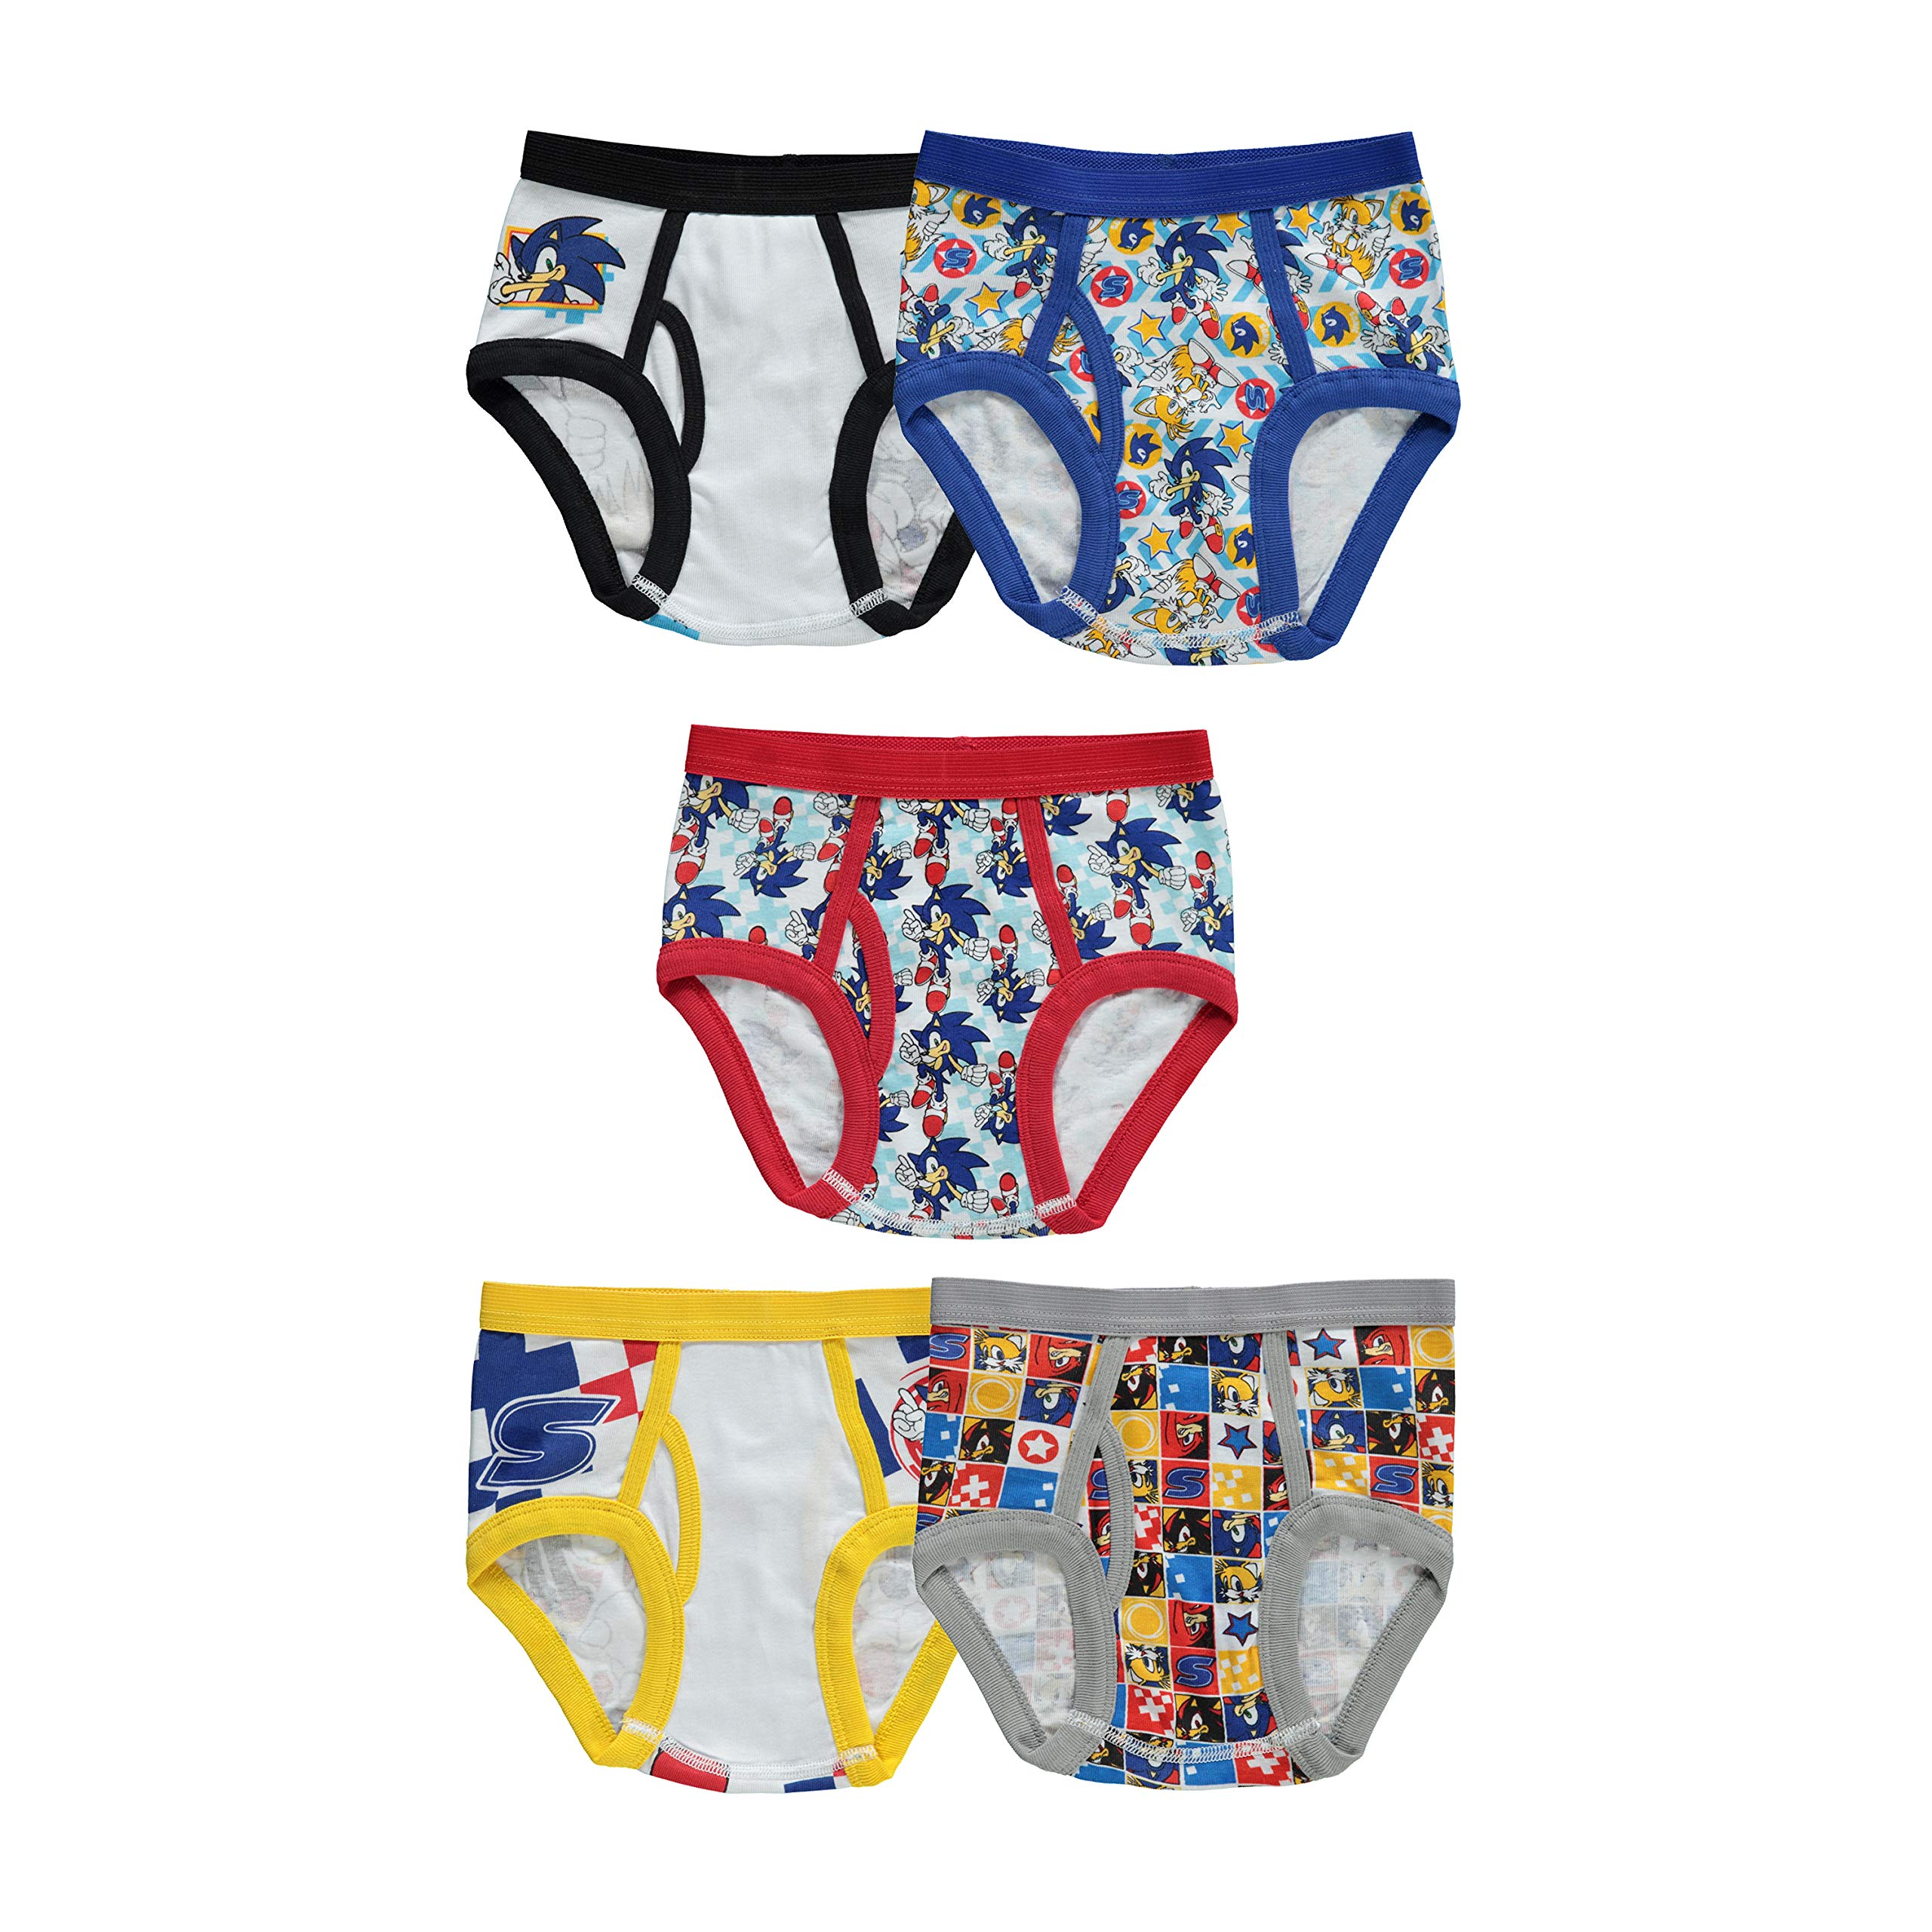 Sonic The Hedgehog Boys' Big Boxer Briefs Multipacks Available in Sizes 4, 6, 8, 10, and 12